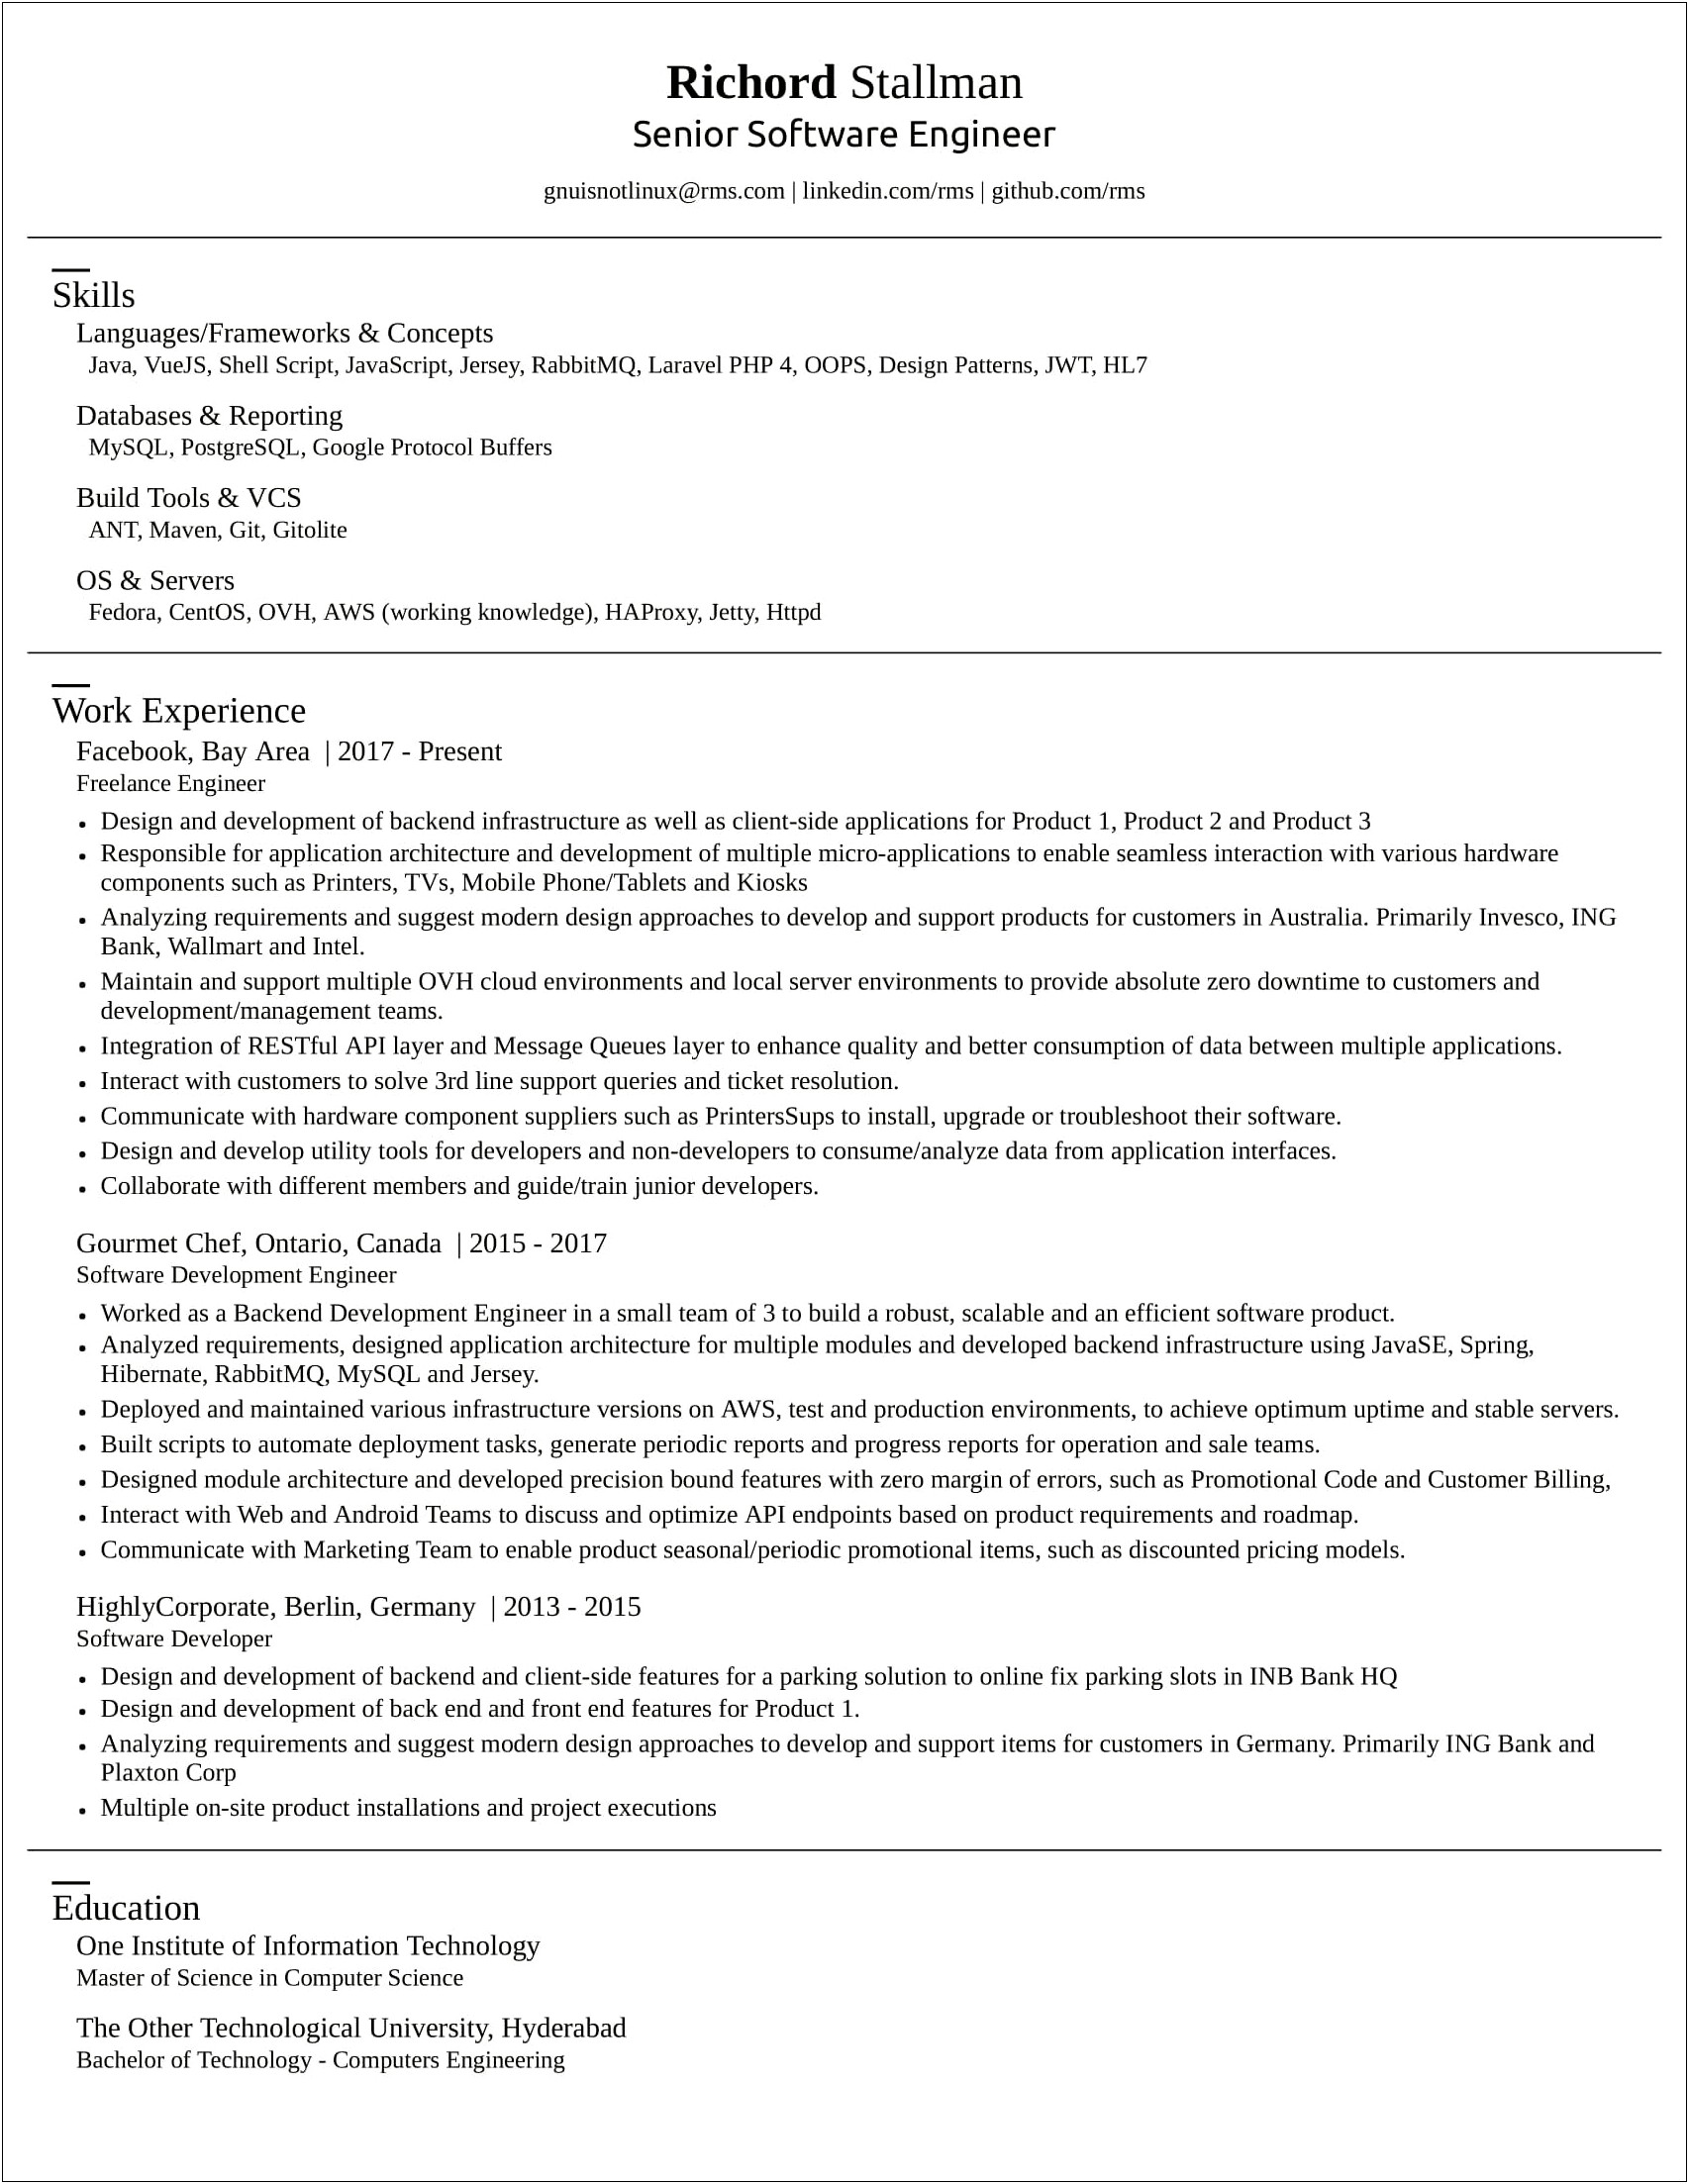 11 Years Experience Engineering 2 Page Resume